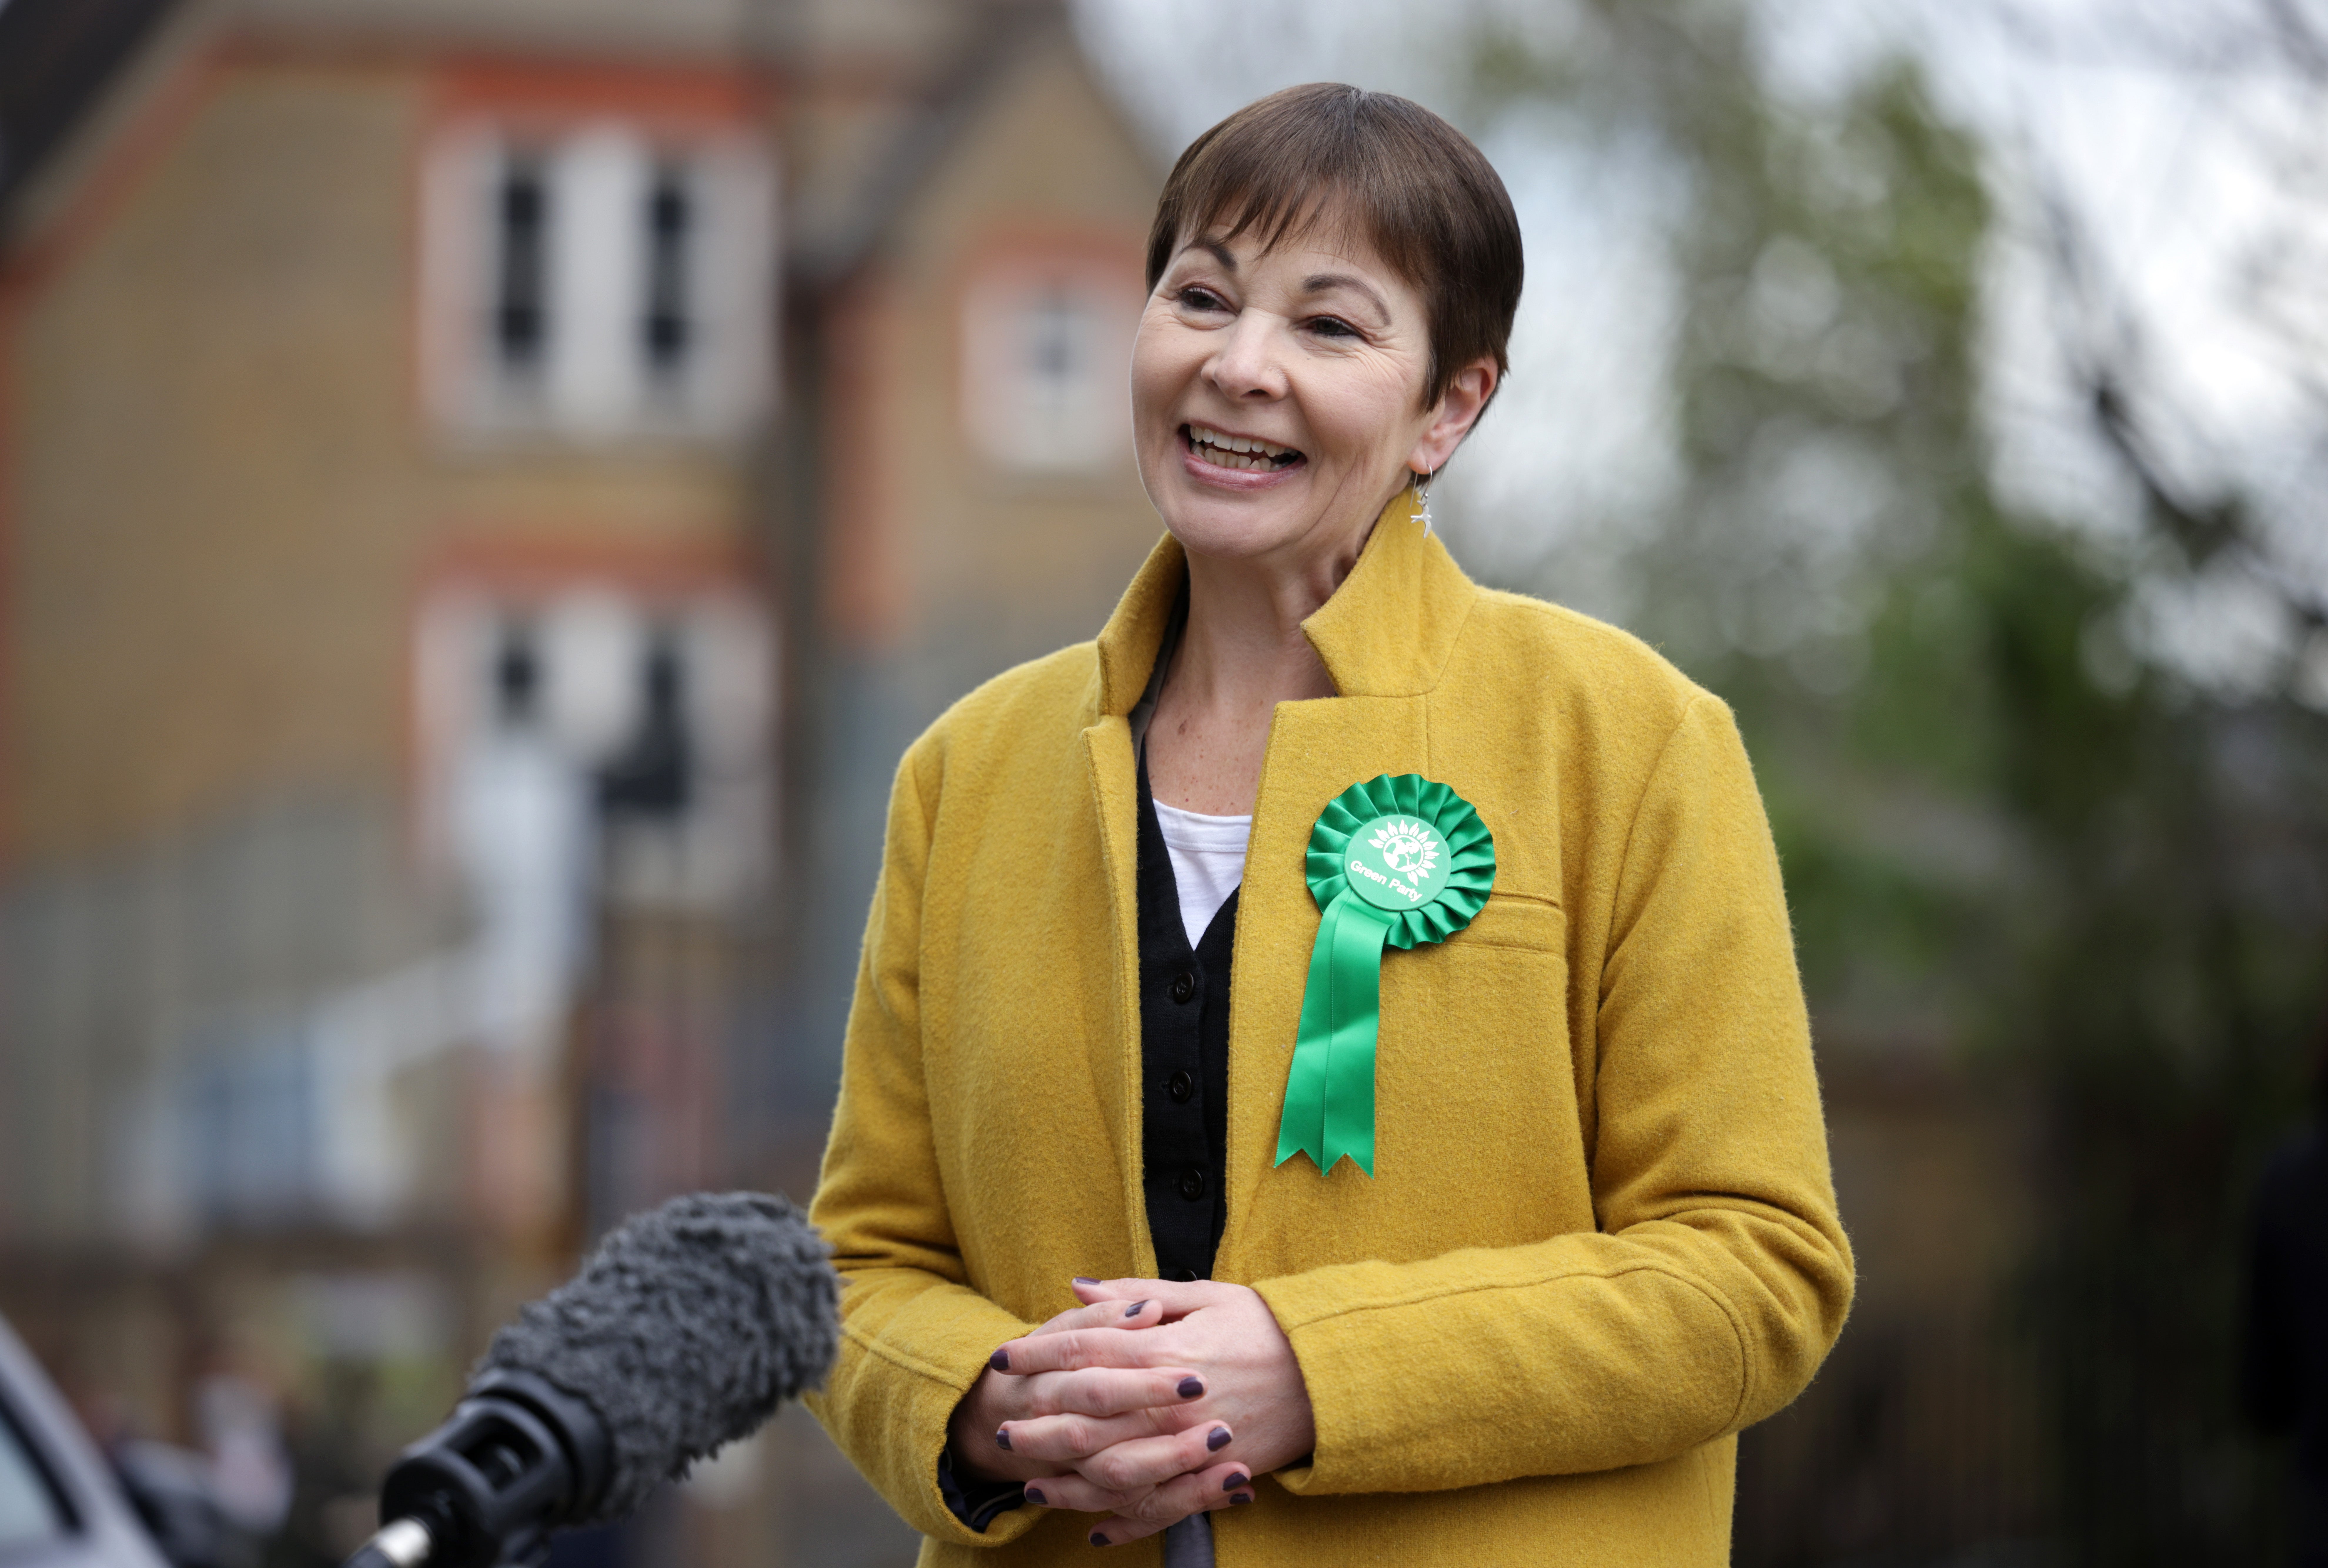 Caroline Lucas is a Green Party MP